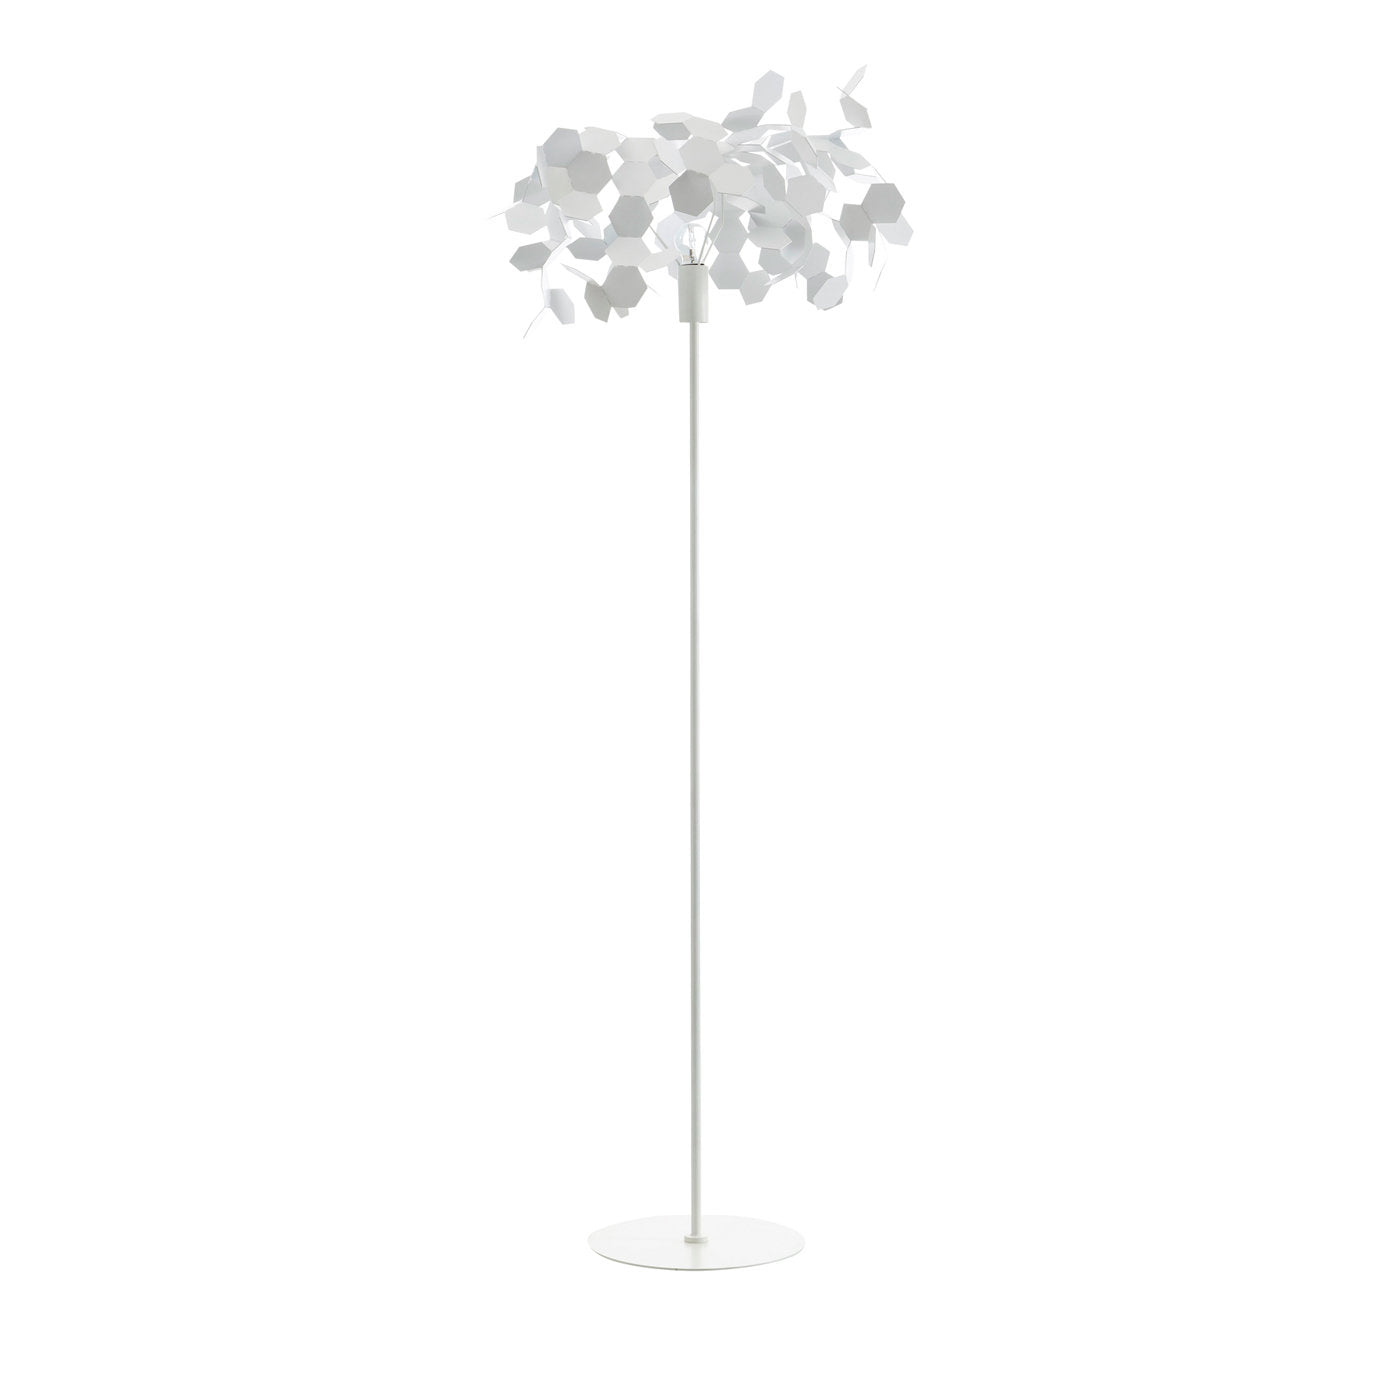 Andromeda White Floor Lamp by Paolo Ulian - Main view